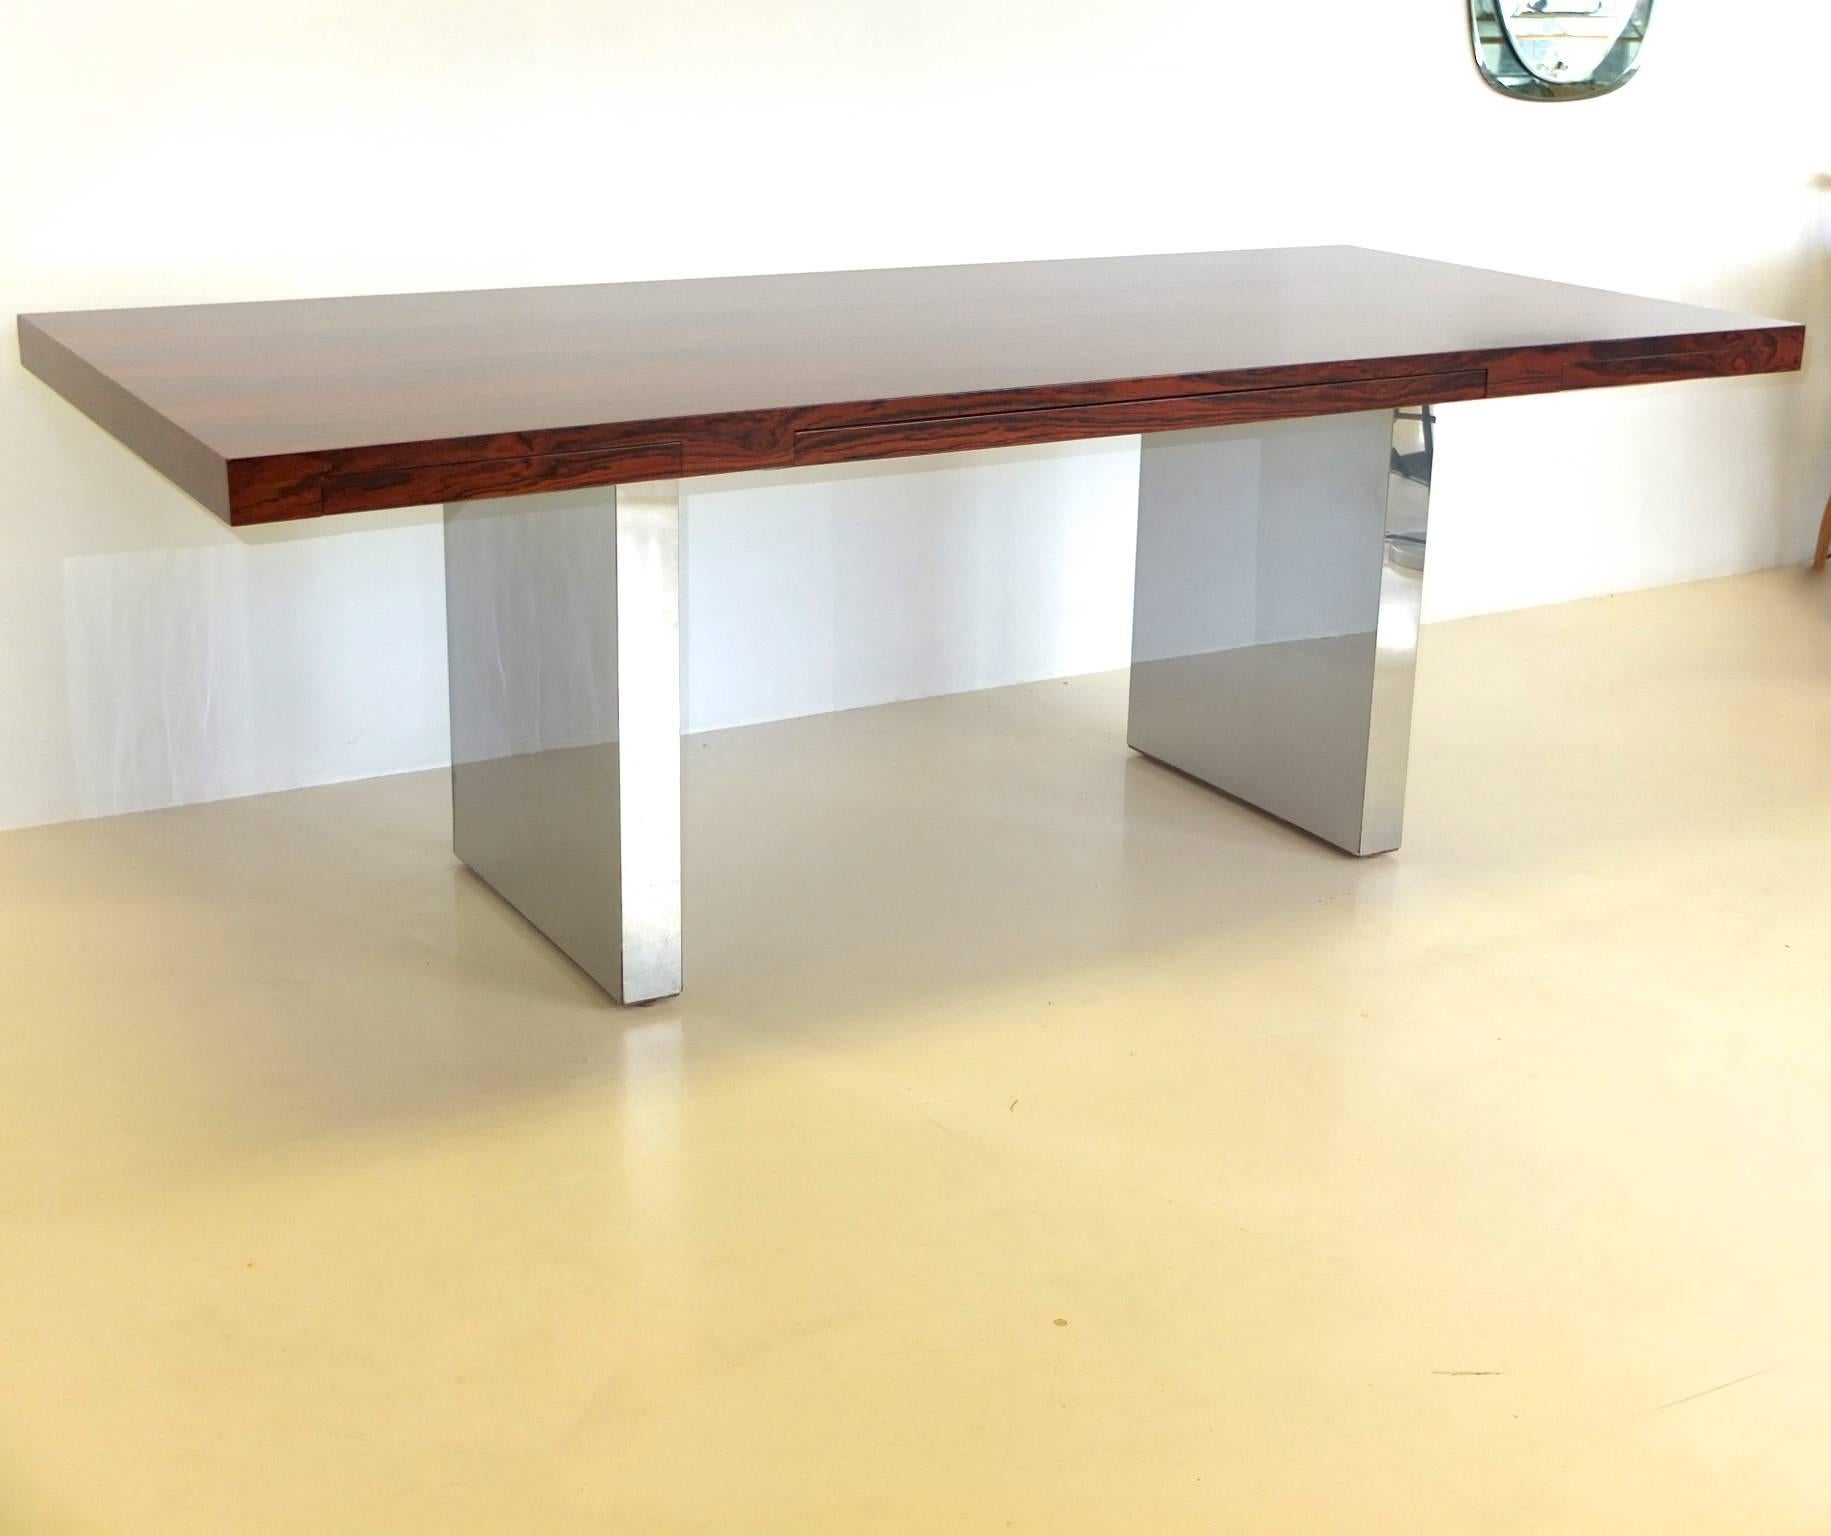 
Rich beautifully grained rosewood top with three drawers on double plinth bases clad in polished chromed steel sheet.

Extremely solid and robust construction. Like Stonehenge!

See our separate listing for the matching credenza.

If